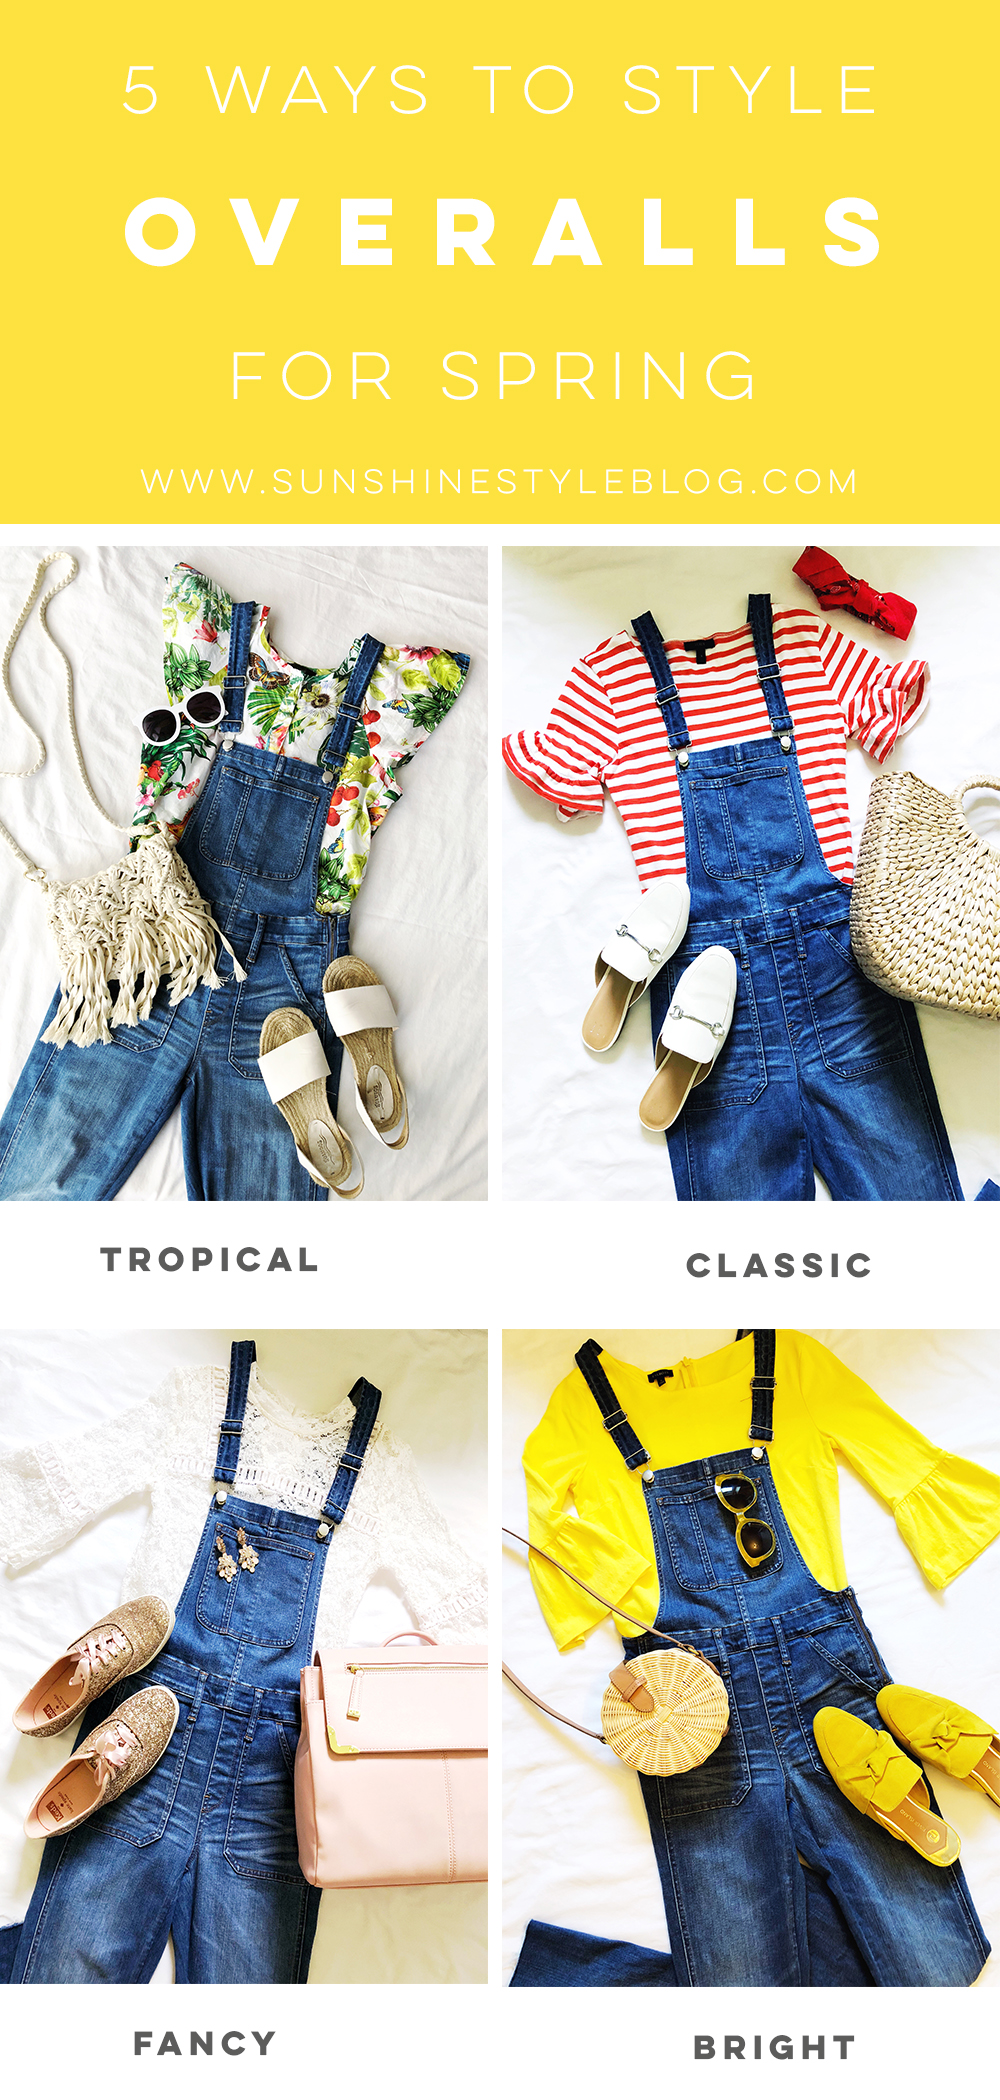 5 Ways to Style Overalls for Spring - florida fashion blogger style madewell overalls